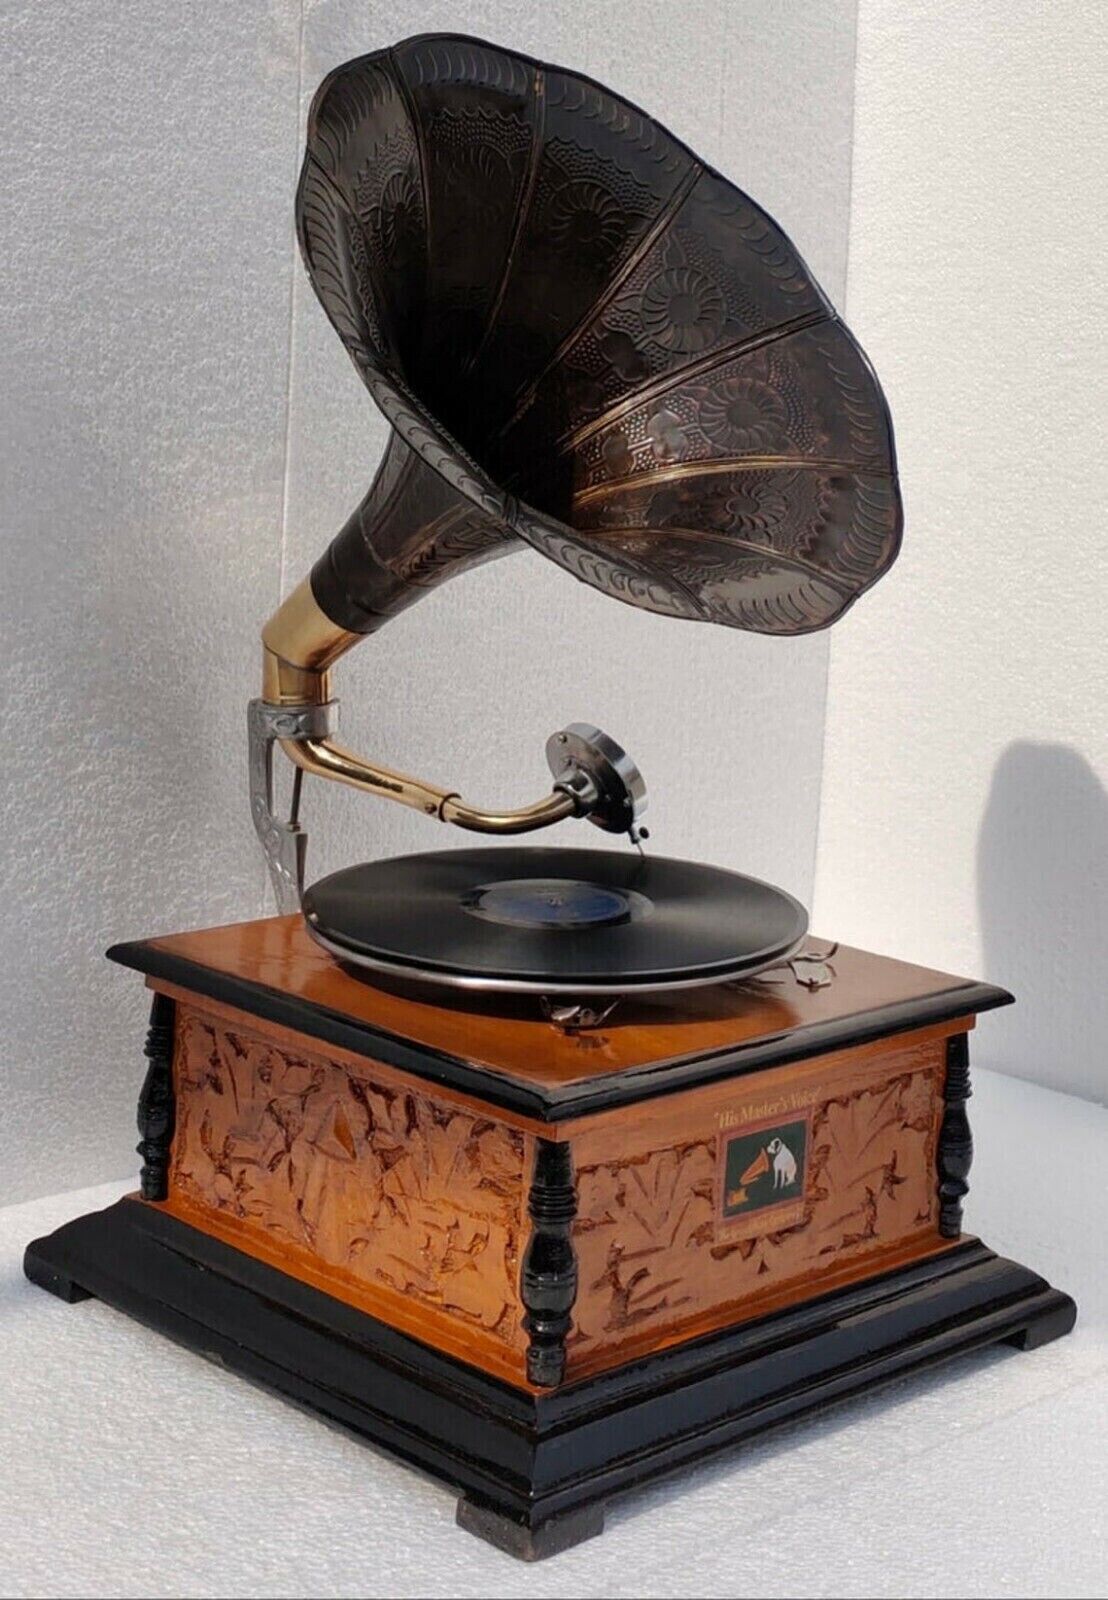 HMV Gramophone Phonograph Working Antique Audio ,win-up record players, Vintage